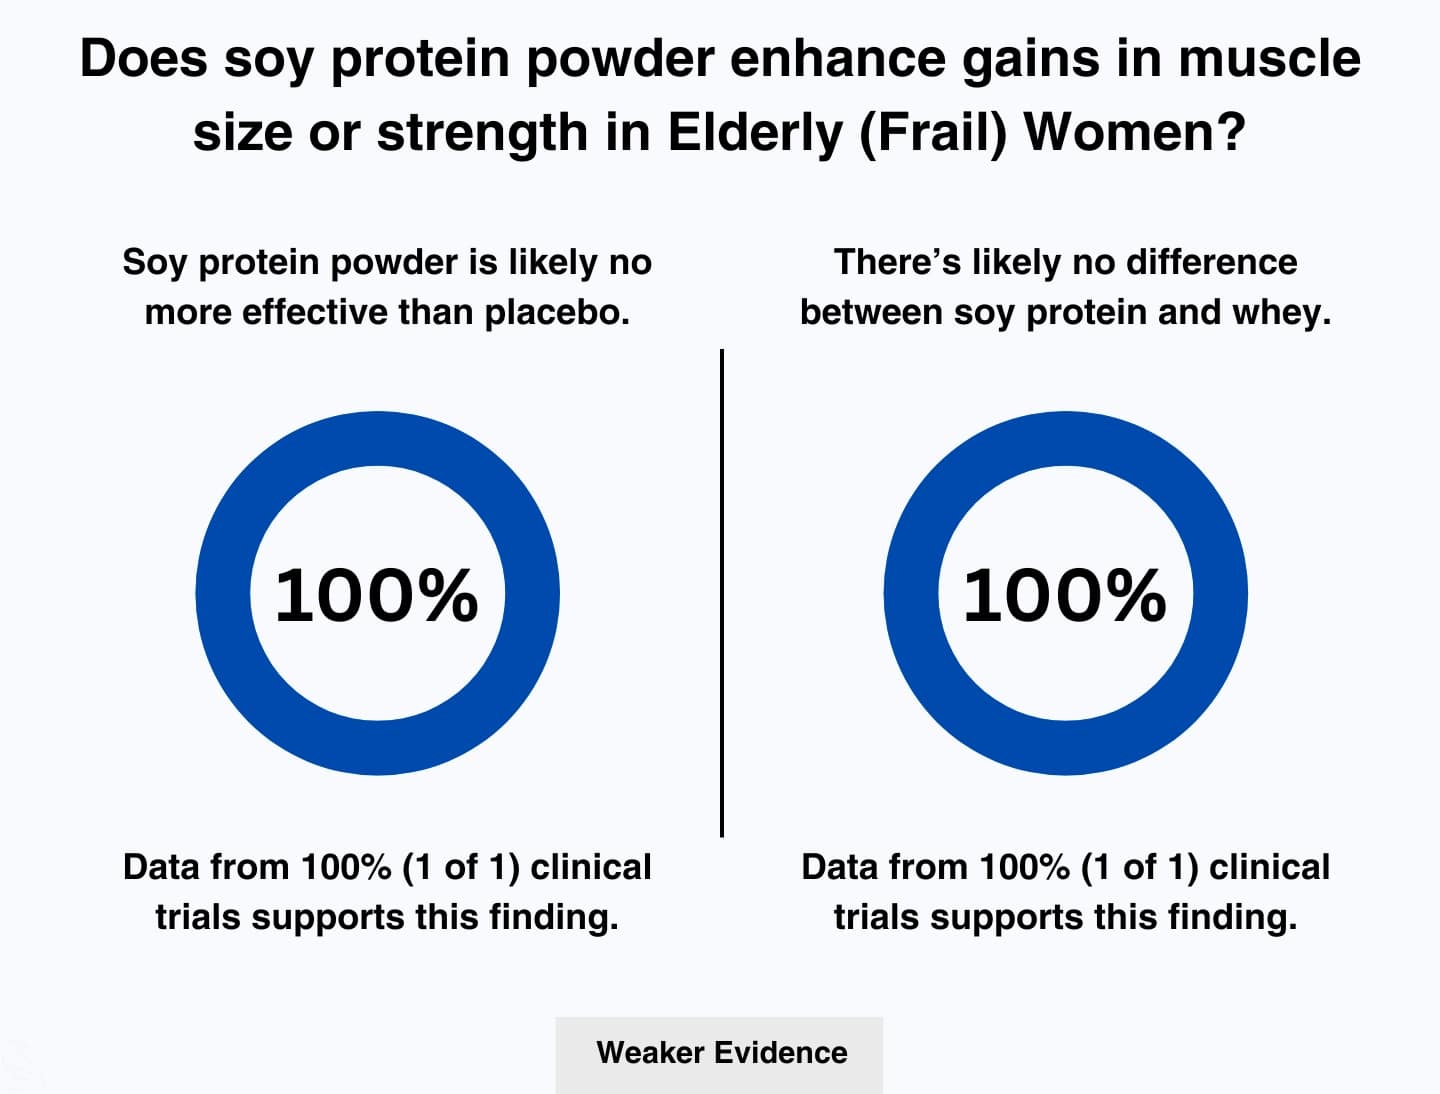 This image shows that the use of soy protein when bodybuilding, weighlifting, or another engaging in another resistance exercise is unlikely to be more effective than placebo or whey in frail individuals.